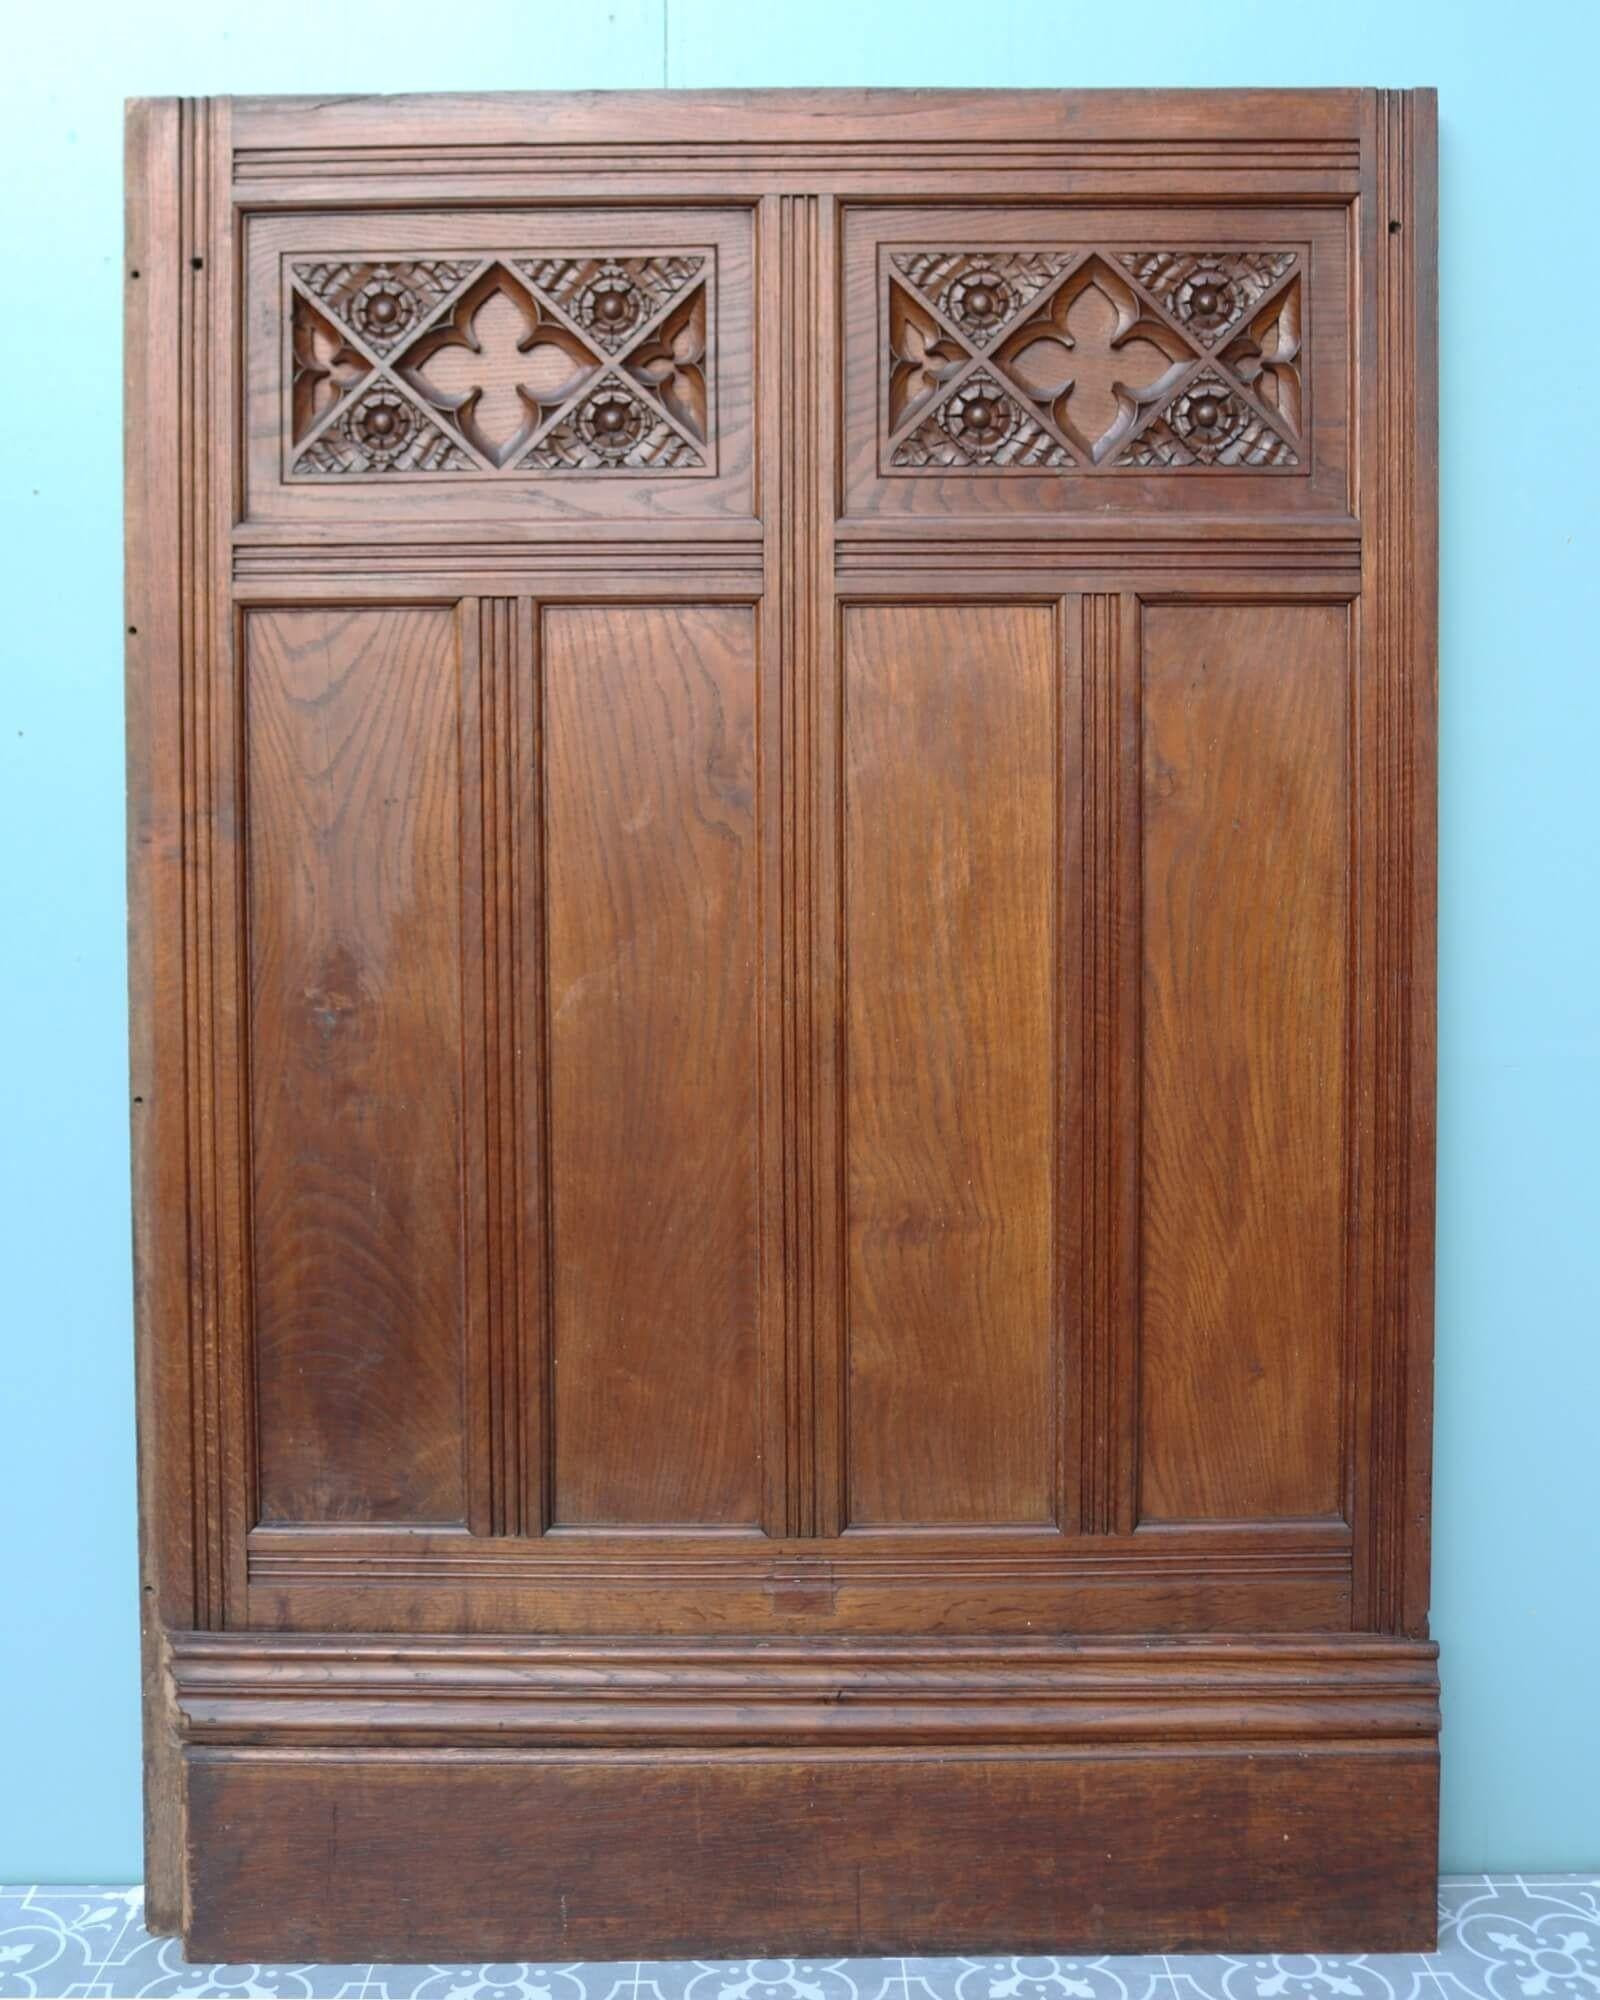 A decorative and ornate set of antique dado height carved oak wall paneling dating from the 1870s. Made from solid oak, these Victorian wall panels have a rich wood colour that looks beautiful in any period setting. Each one is detailed to the top